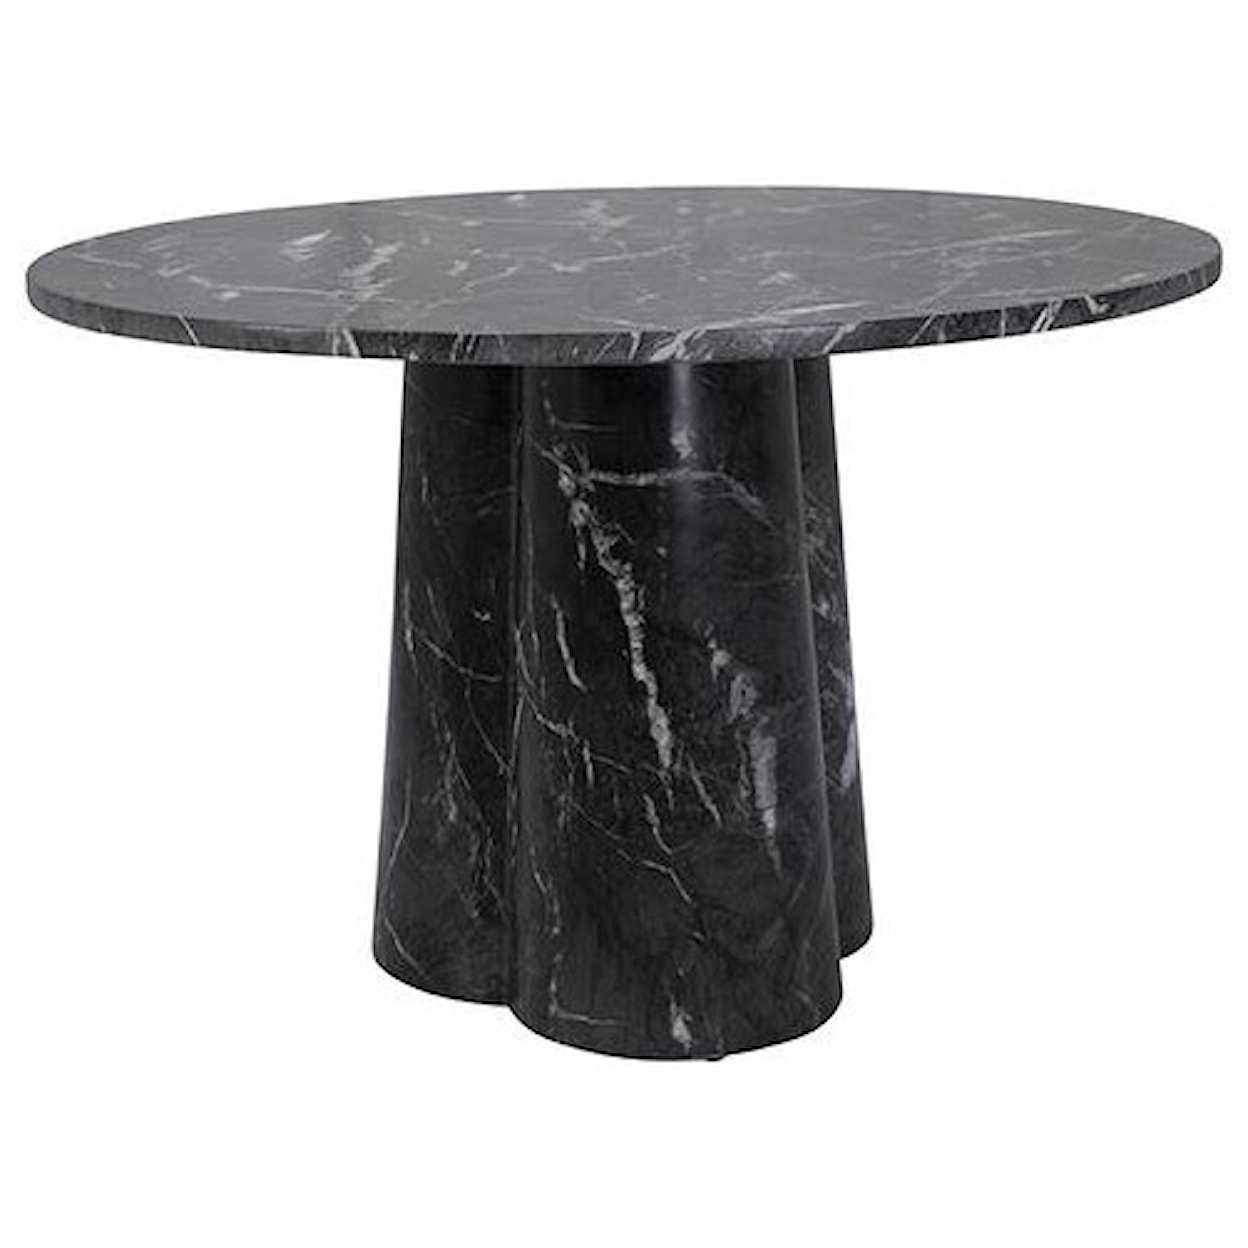 Dovetail Furniture Dining Tables Selina Dining Table